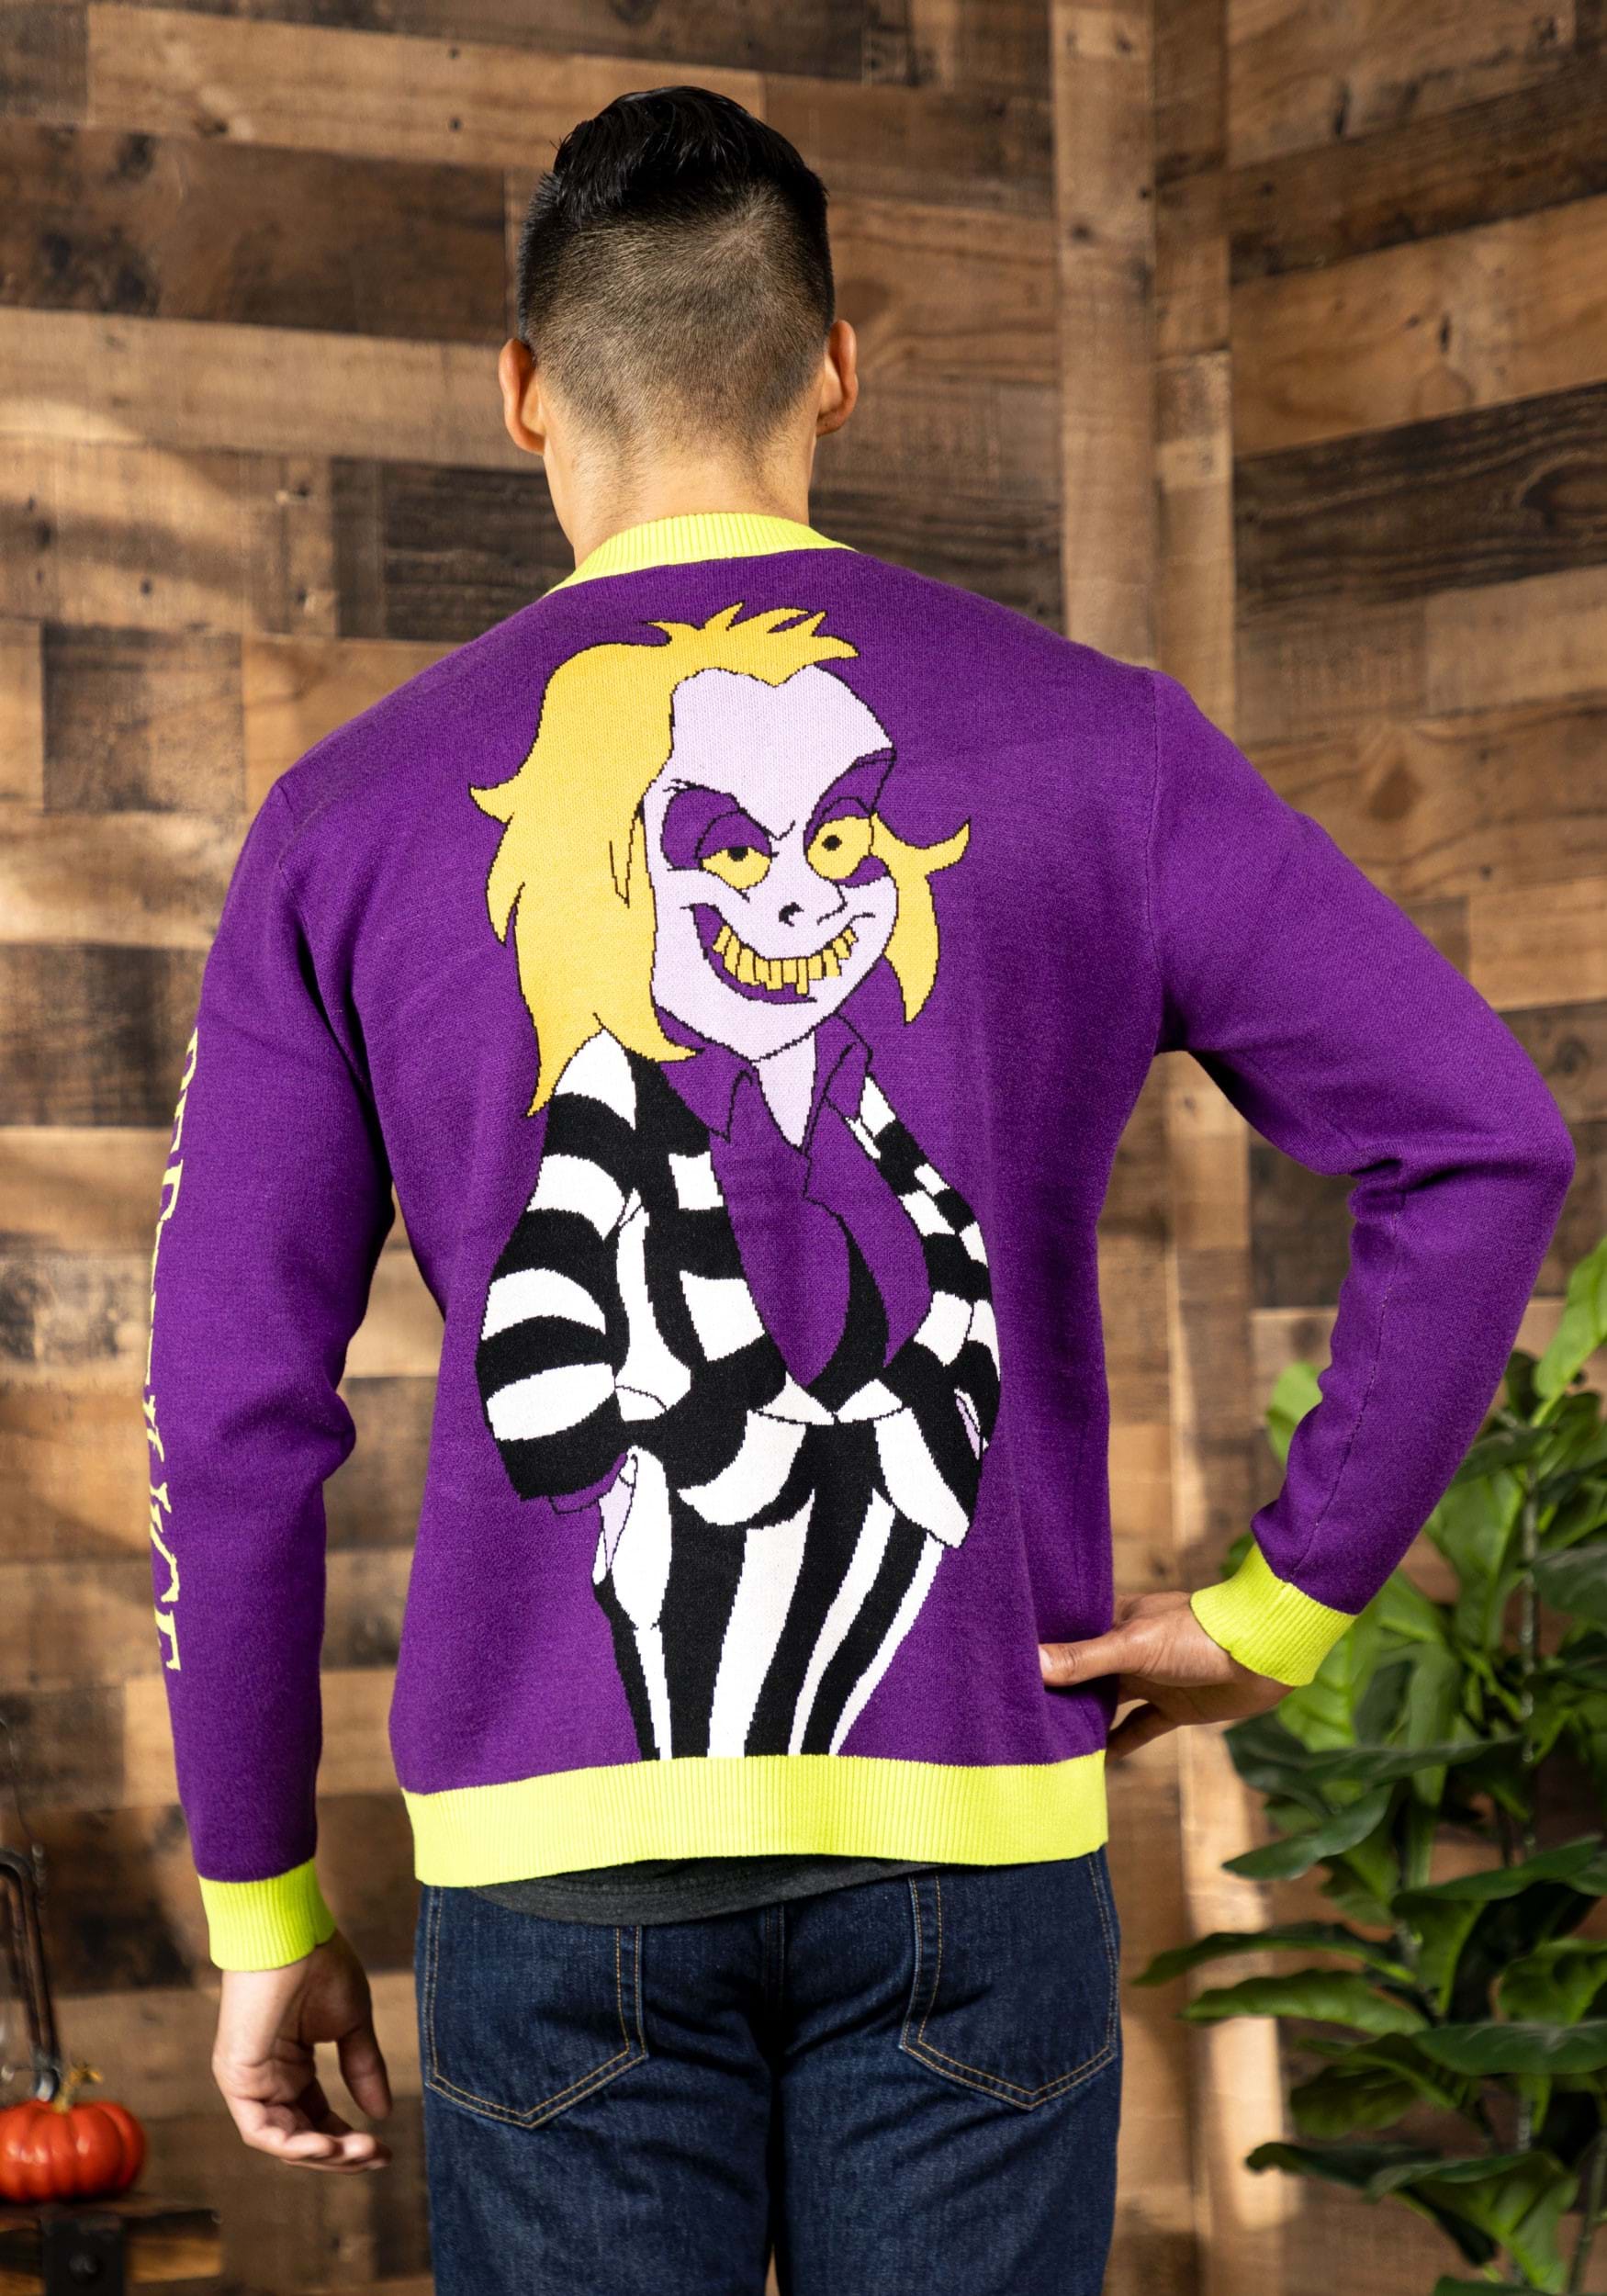 Cakeworthy Beetlejuice Purple Knit Cardigan For Adults